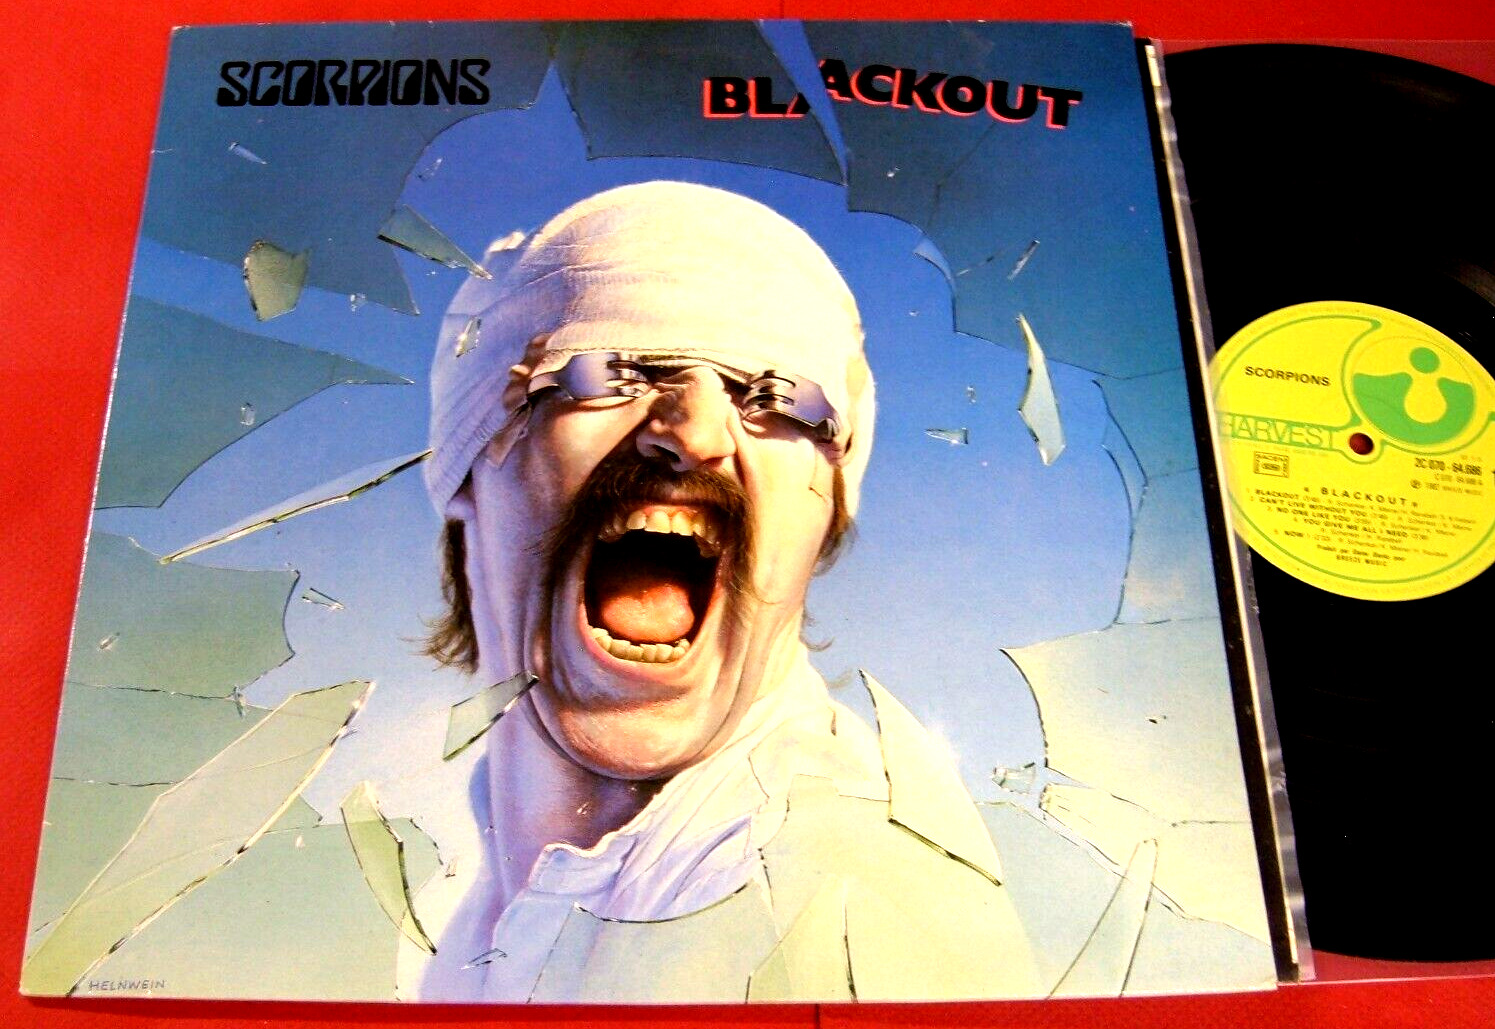 Scorpions  "BLACKOUT"  1982, French Harvest 2C 070-64.686  1st Pressing  NM-/NM-